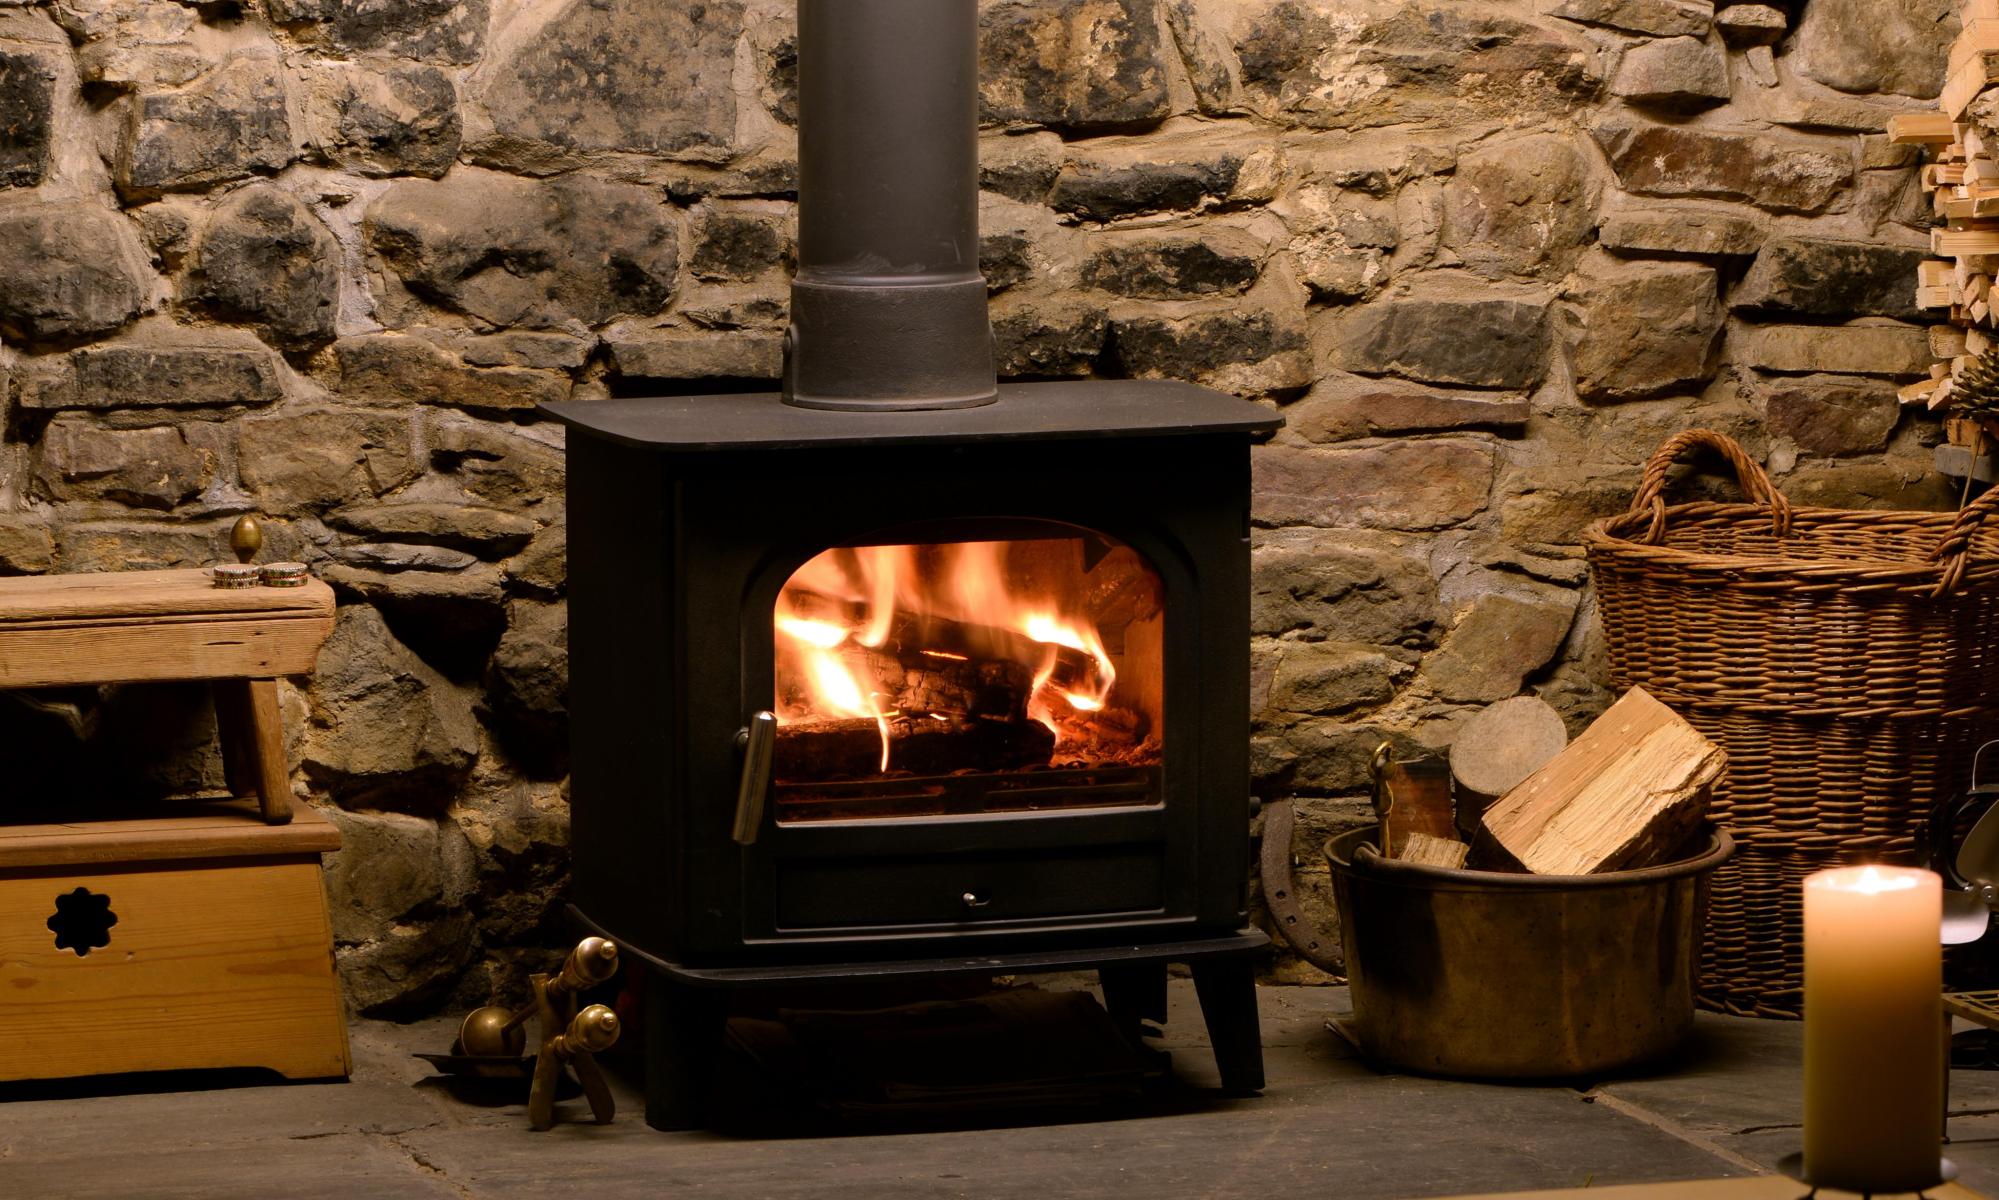 Home wood burning in UK causes £1bn of health costs a year, report says